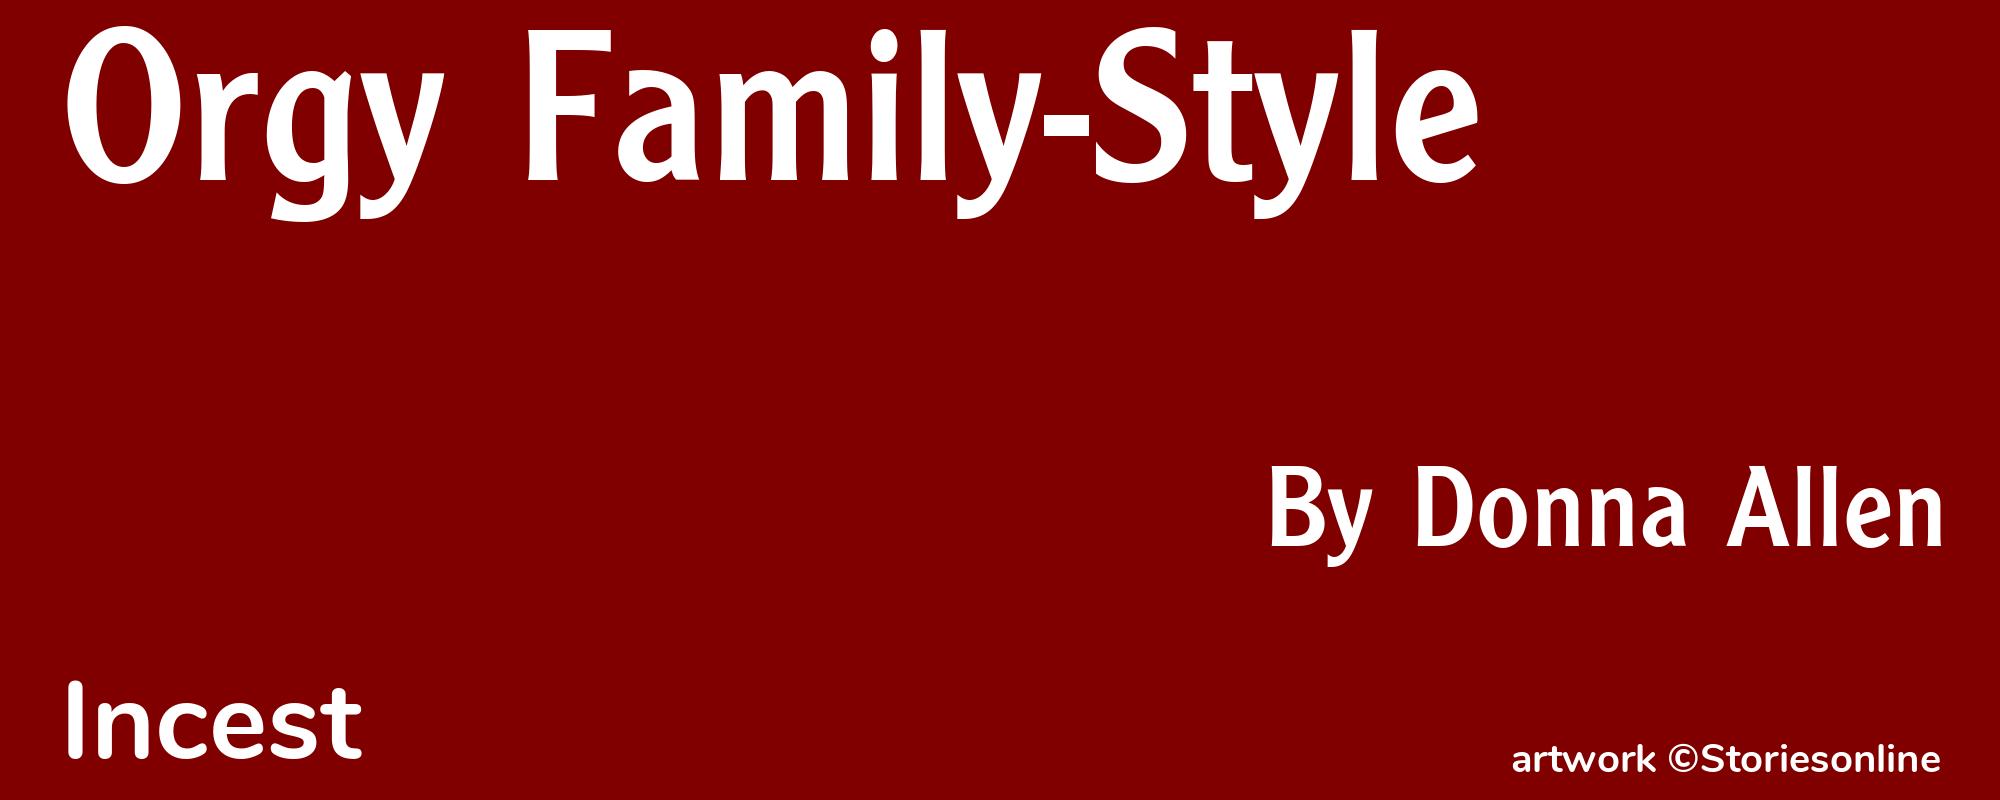 Orgy Family-Style - Cover